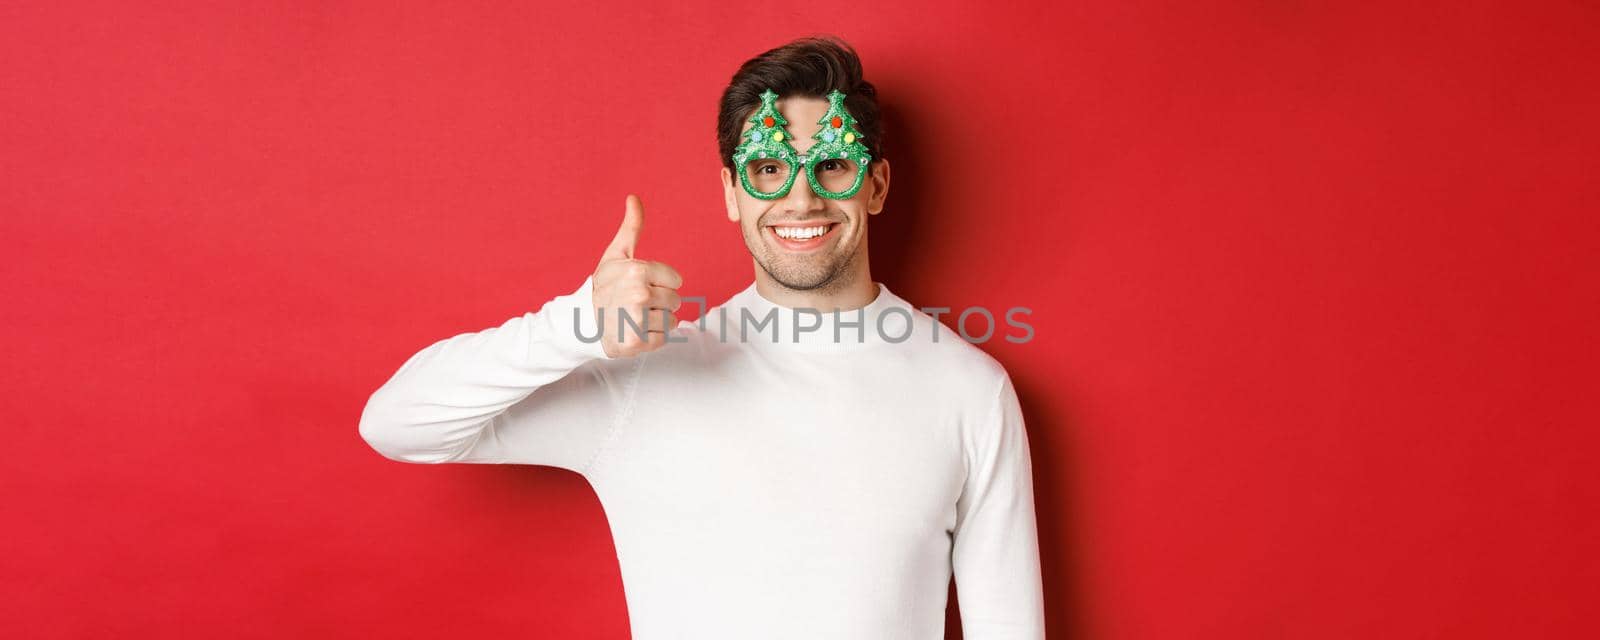 Concept of christmas, winter holidays and celebration. Close-up of handsome smiling man, wearing party glasses and white sweater, showing thumbs-up, recommending new year promo.